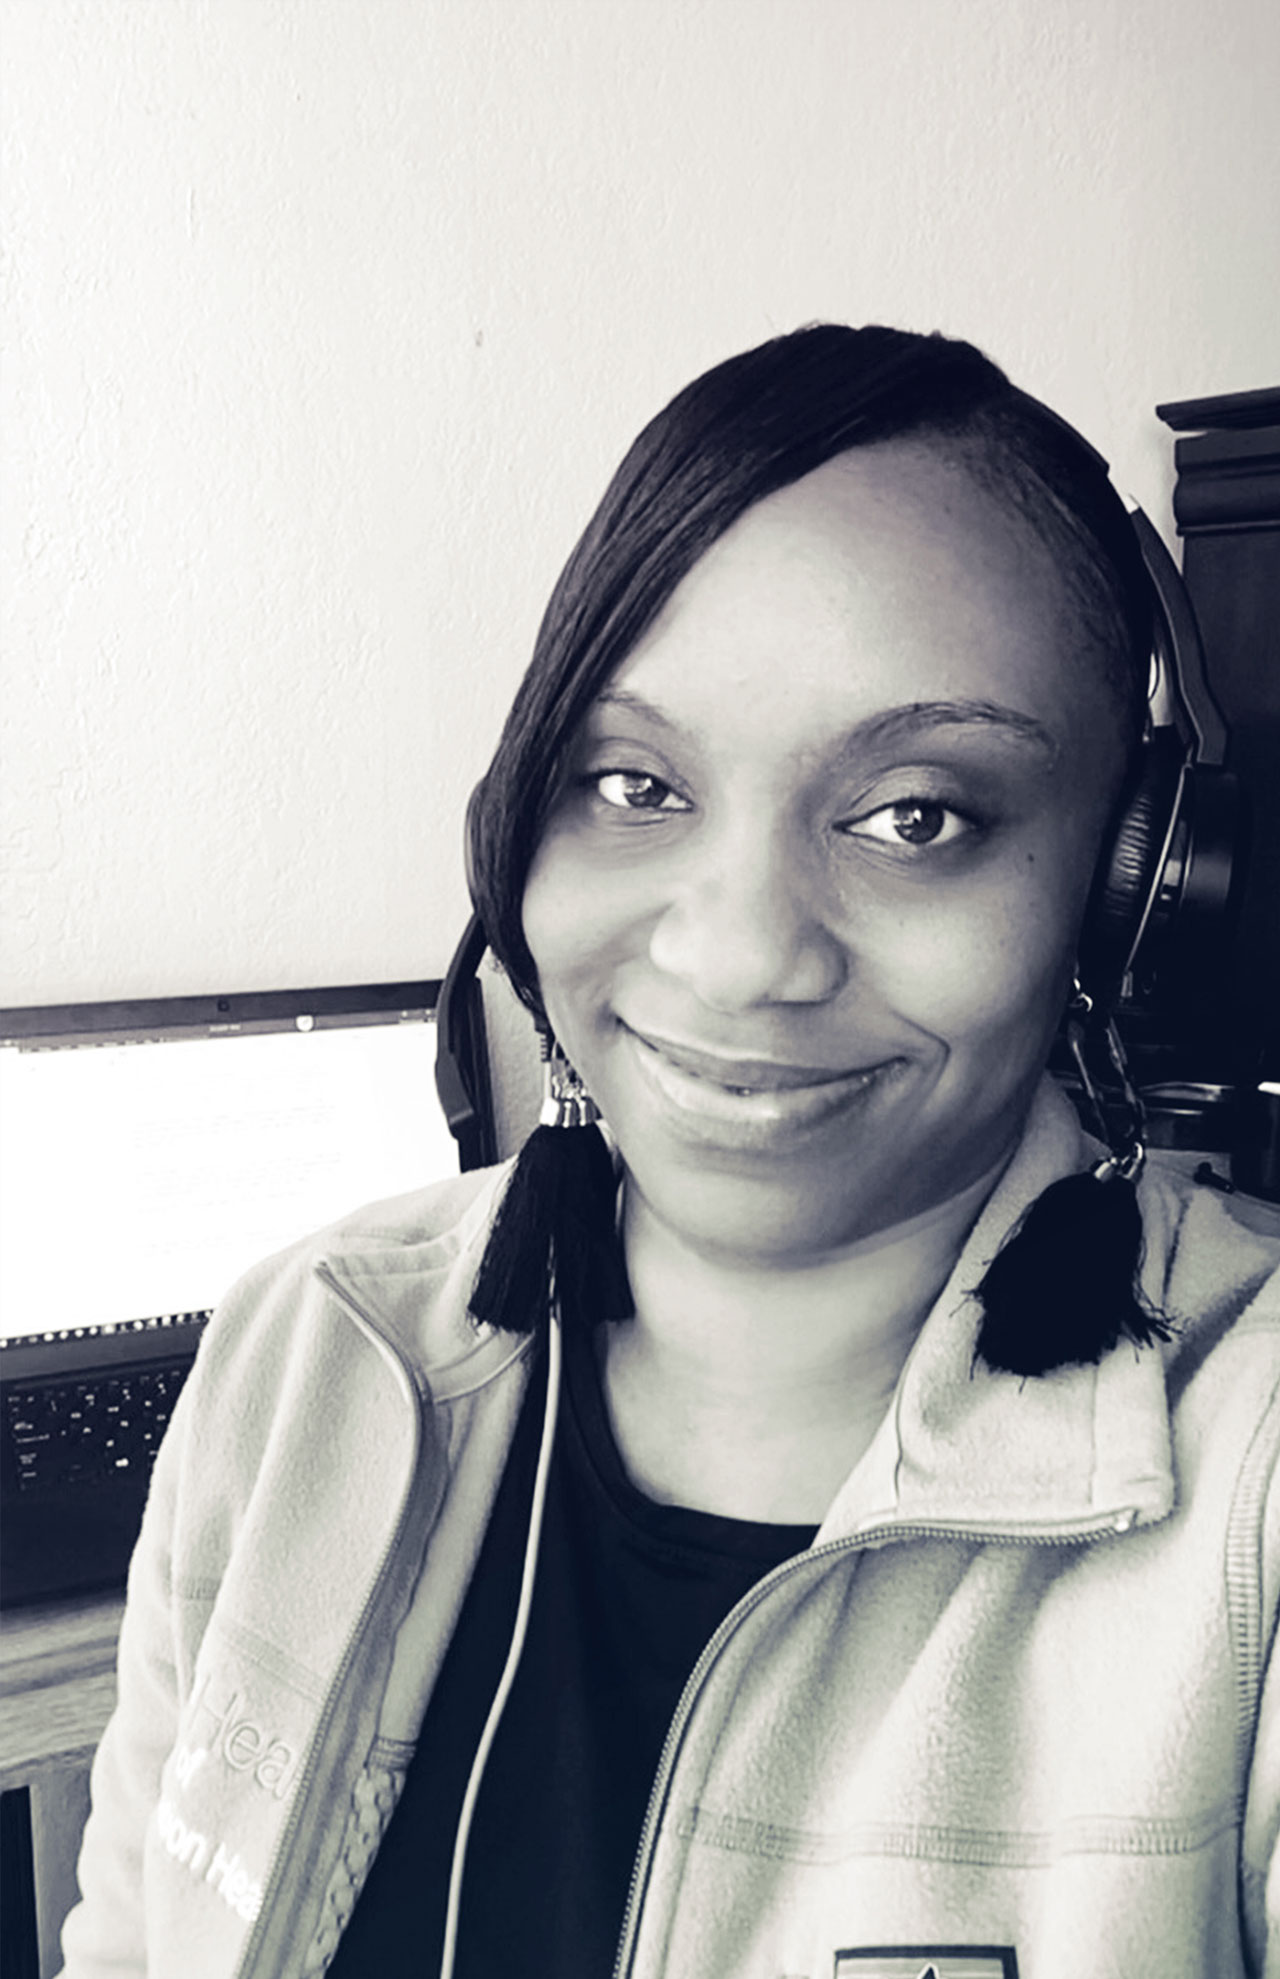 Portrait of Monique Posey with her headset on and computer in the background.